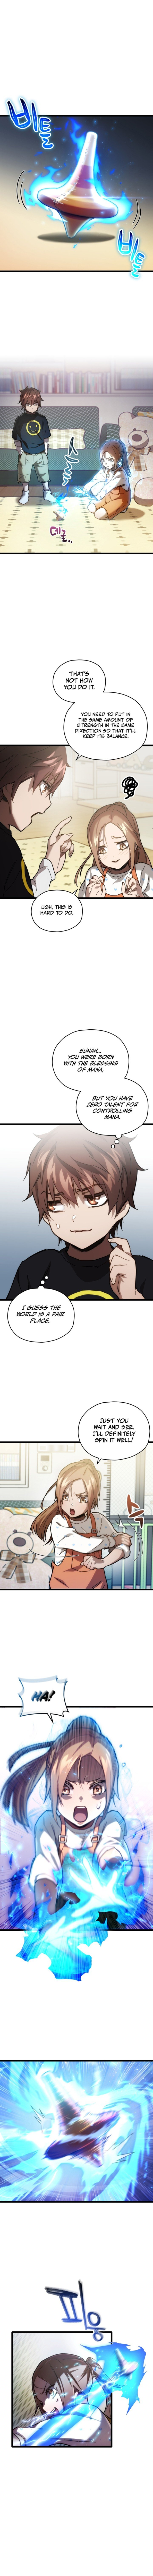 relife-player-chap-3-1